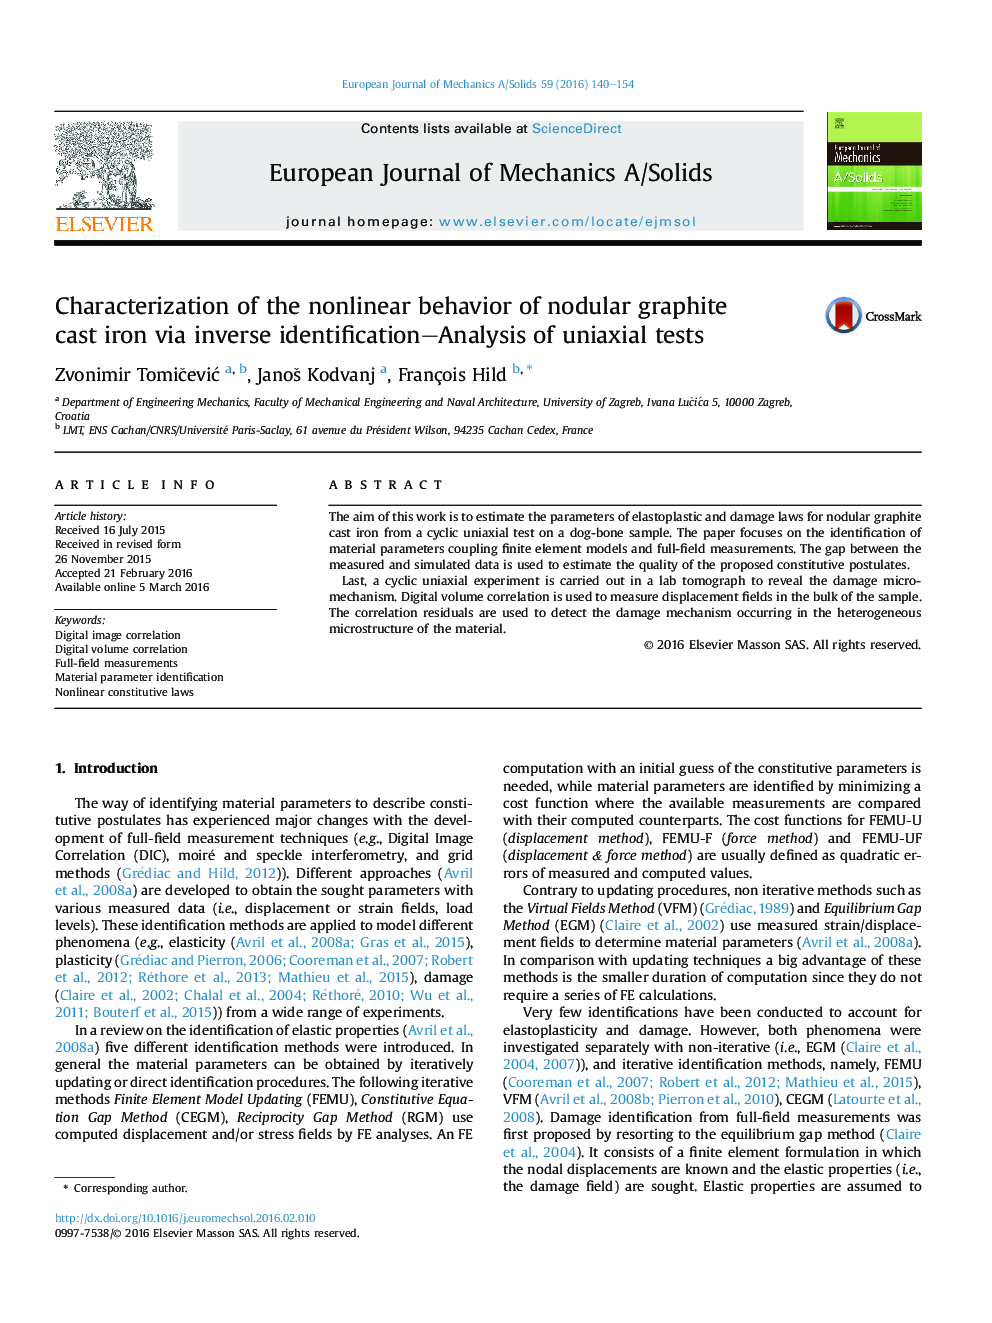 Characterization of the nonlinear behavior of nodular graphite cast iron via inverse identification–Analysis of uniaxial tests